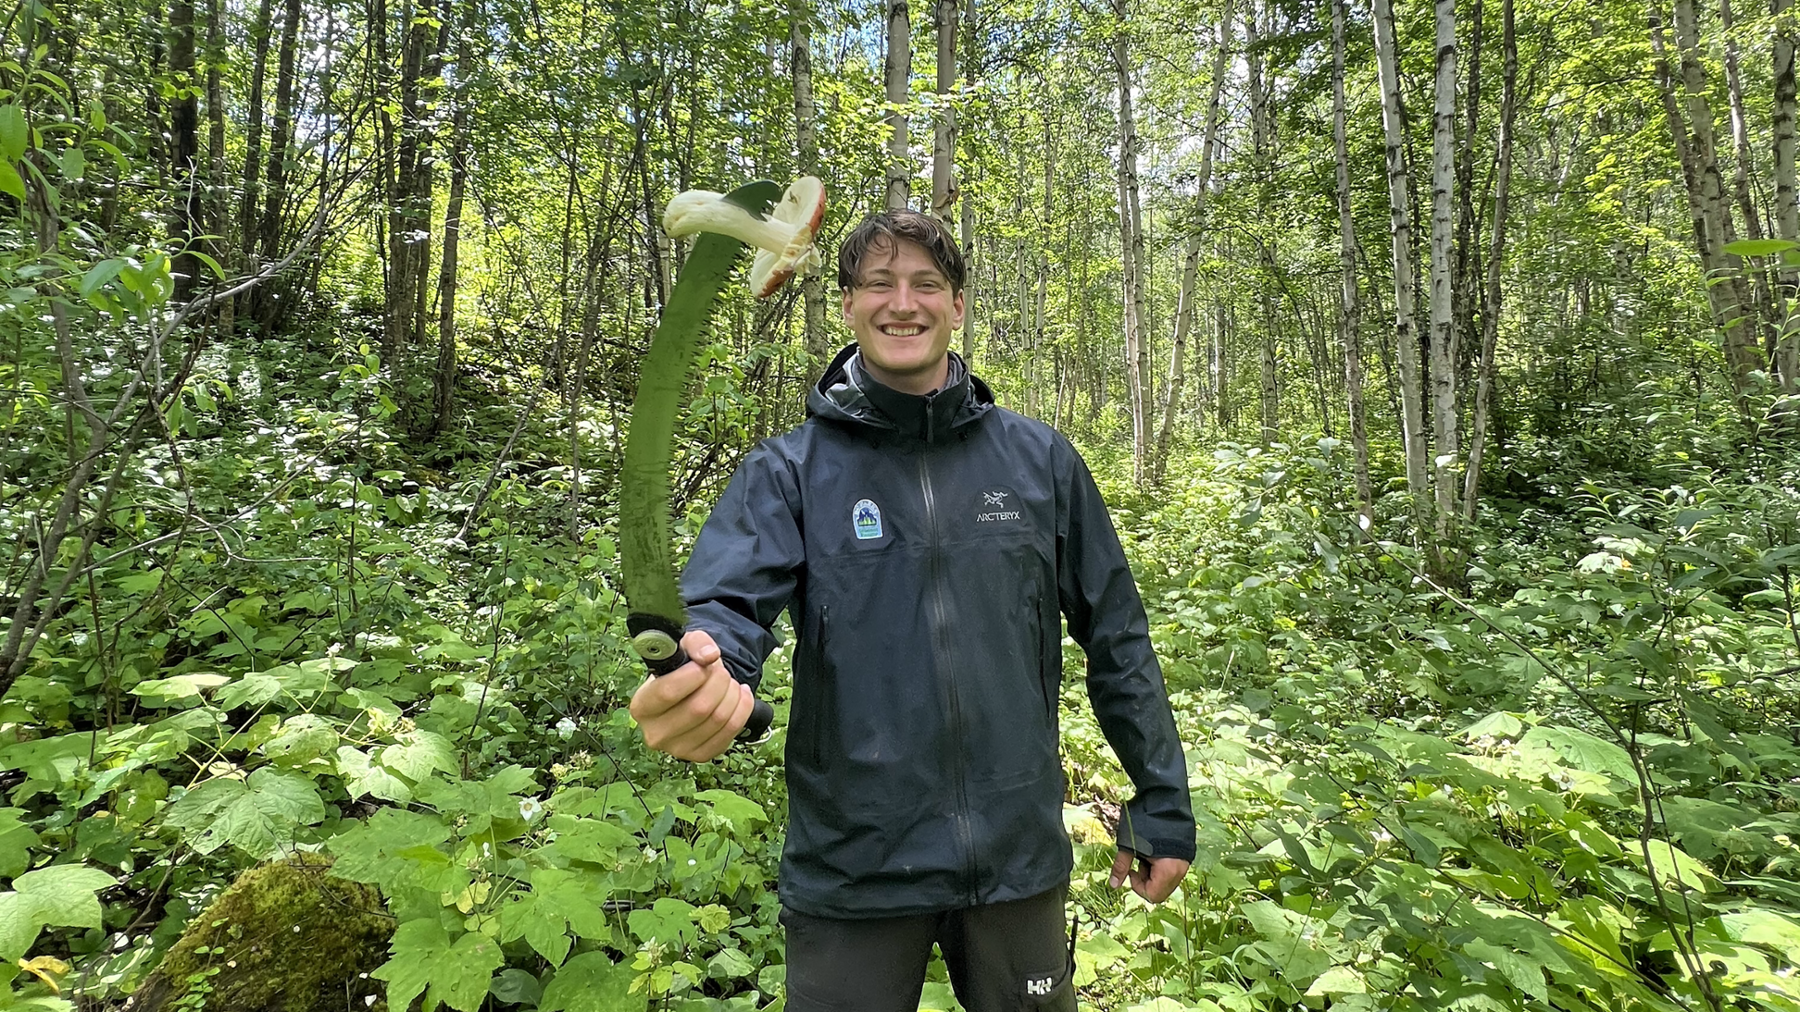 Karl Hare, a co-op student, is standing very happily in the forest, dressed in a waterproof black jacket and black trousers. He is holding up a large serrated knife, on which is impaled a giant white mushroom. He is grinning widely.